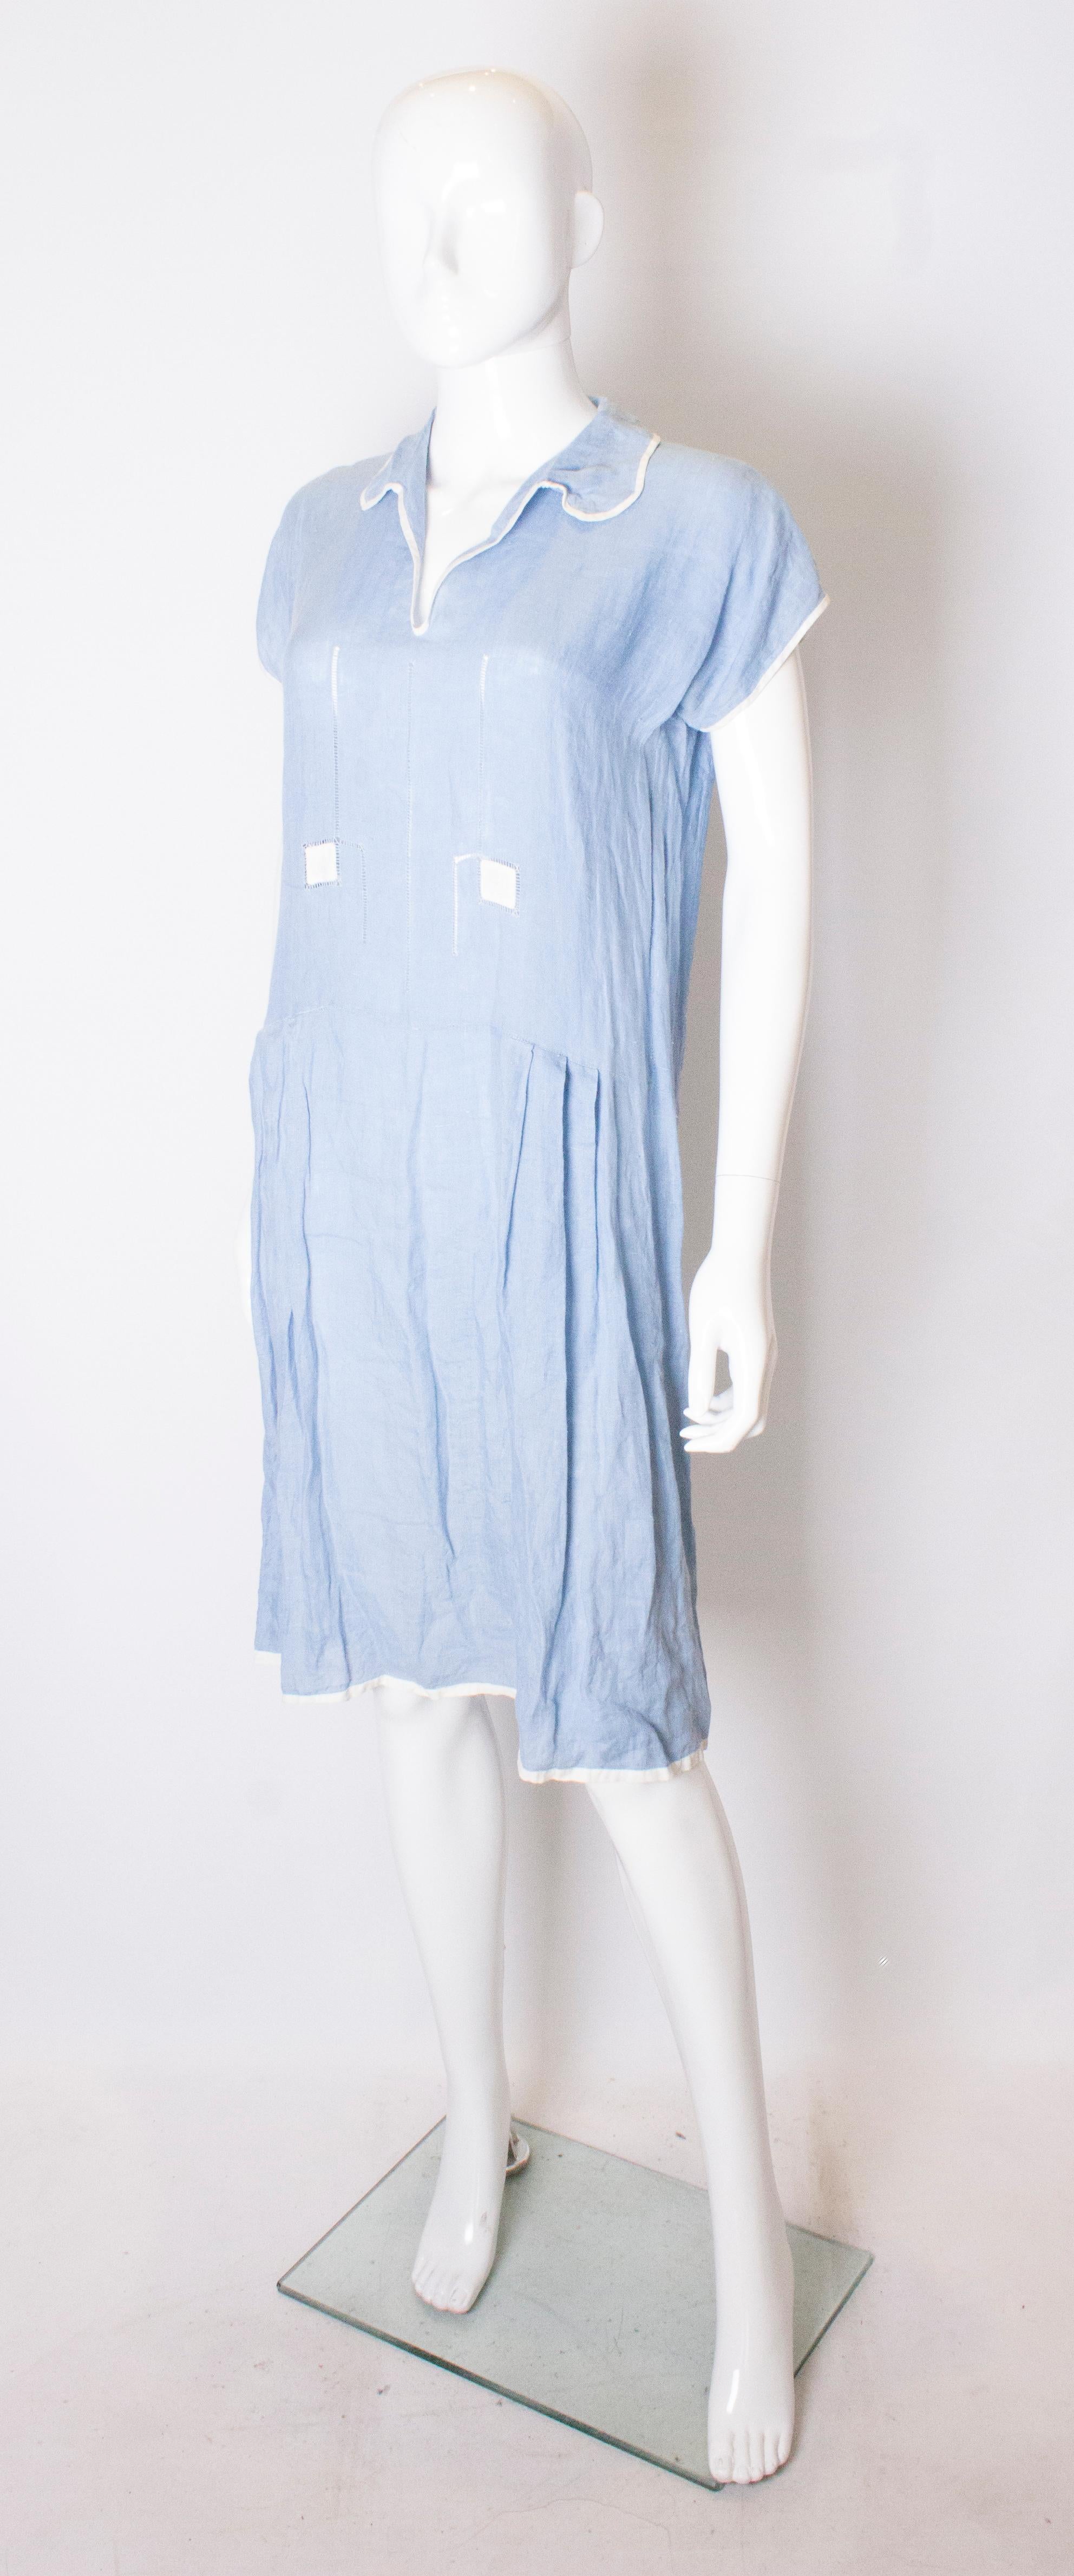 A pretty summer dress from the 1920s. The dress is in a sky blue linen with white piping. The dress has a v neckline and gathering at hip leval.